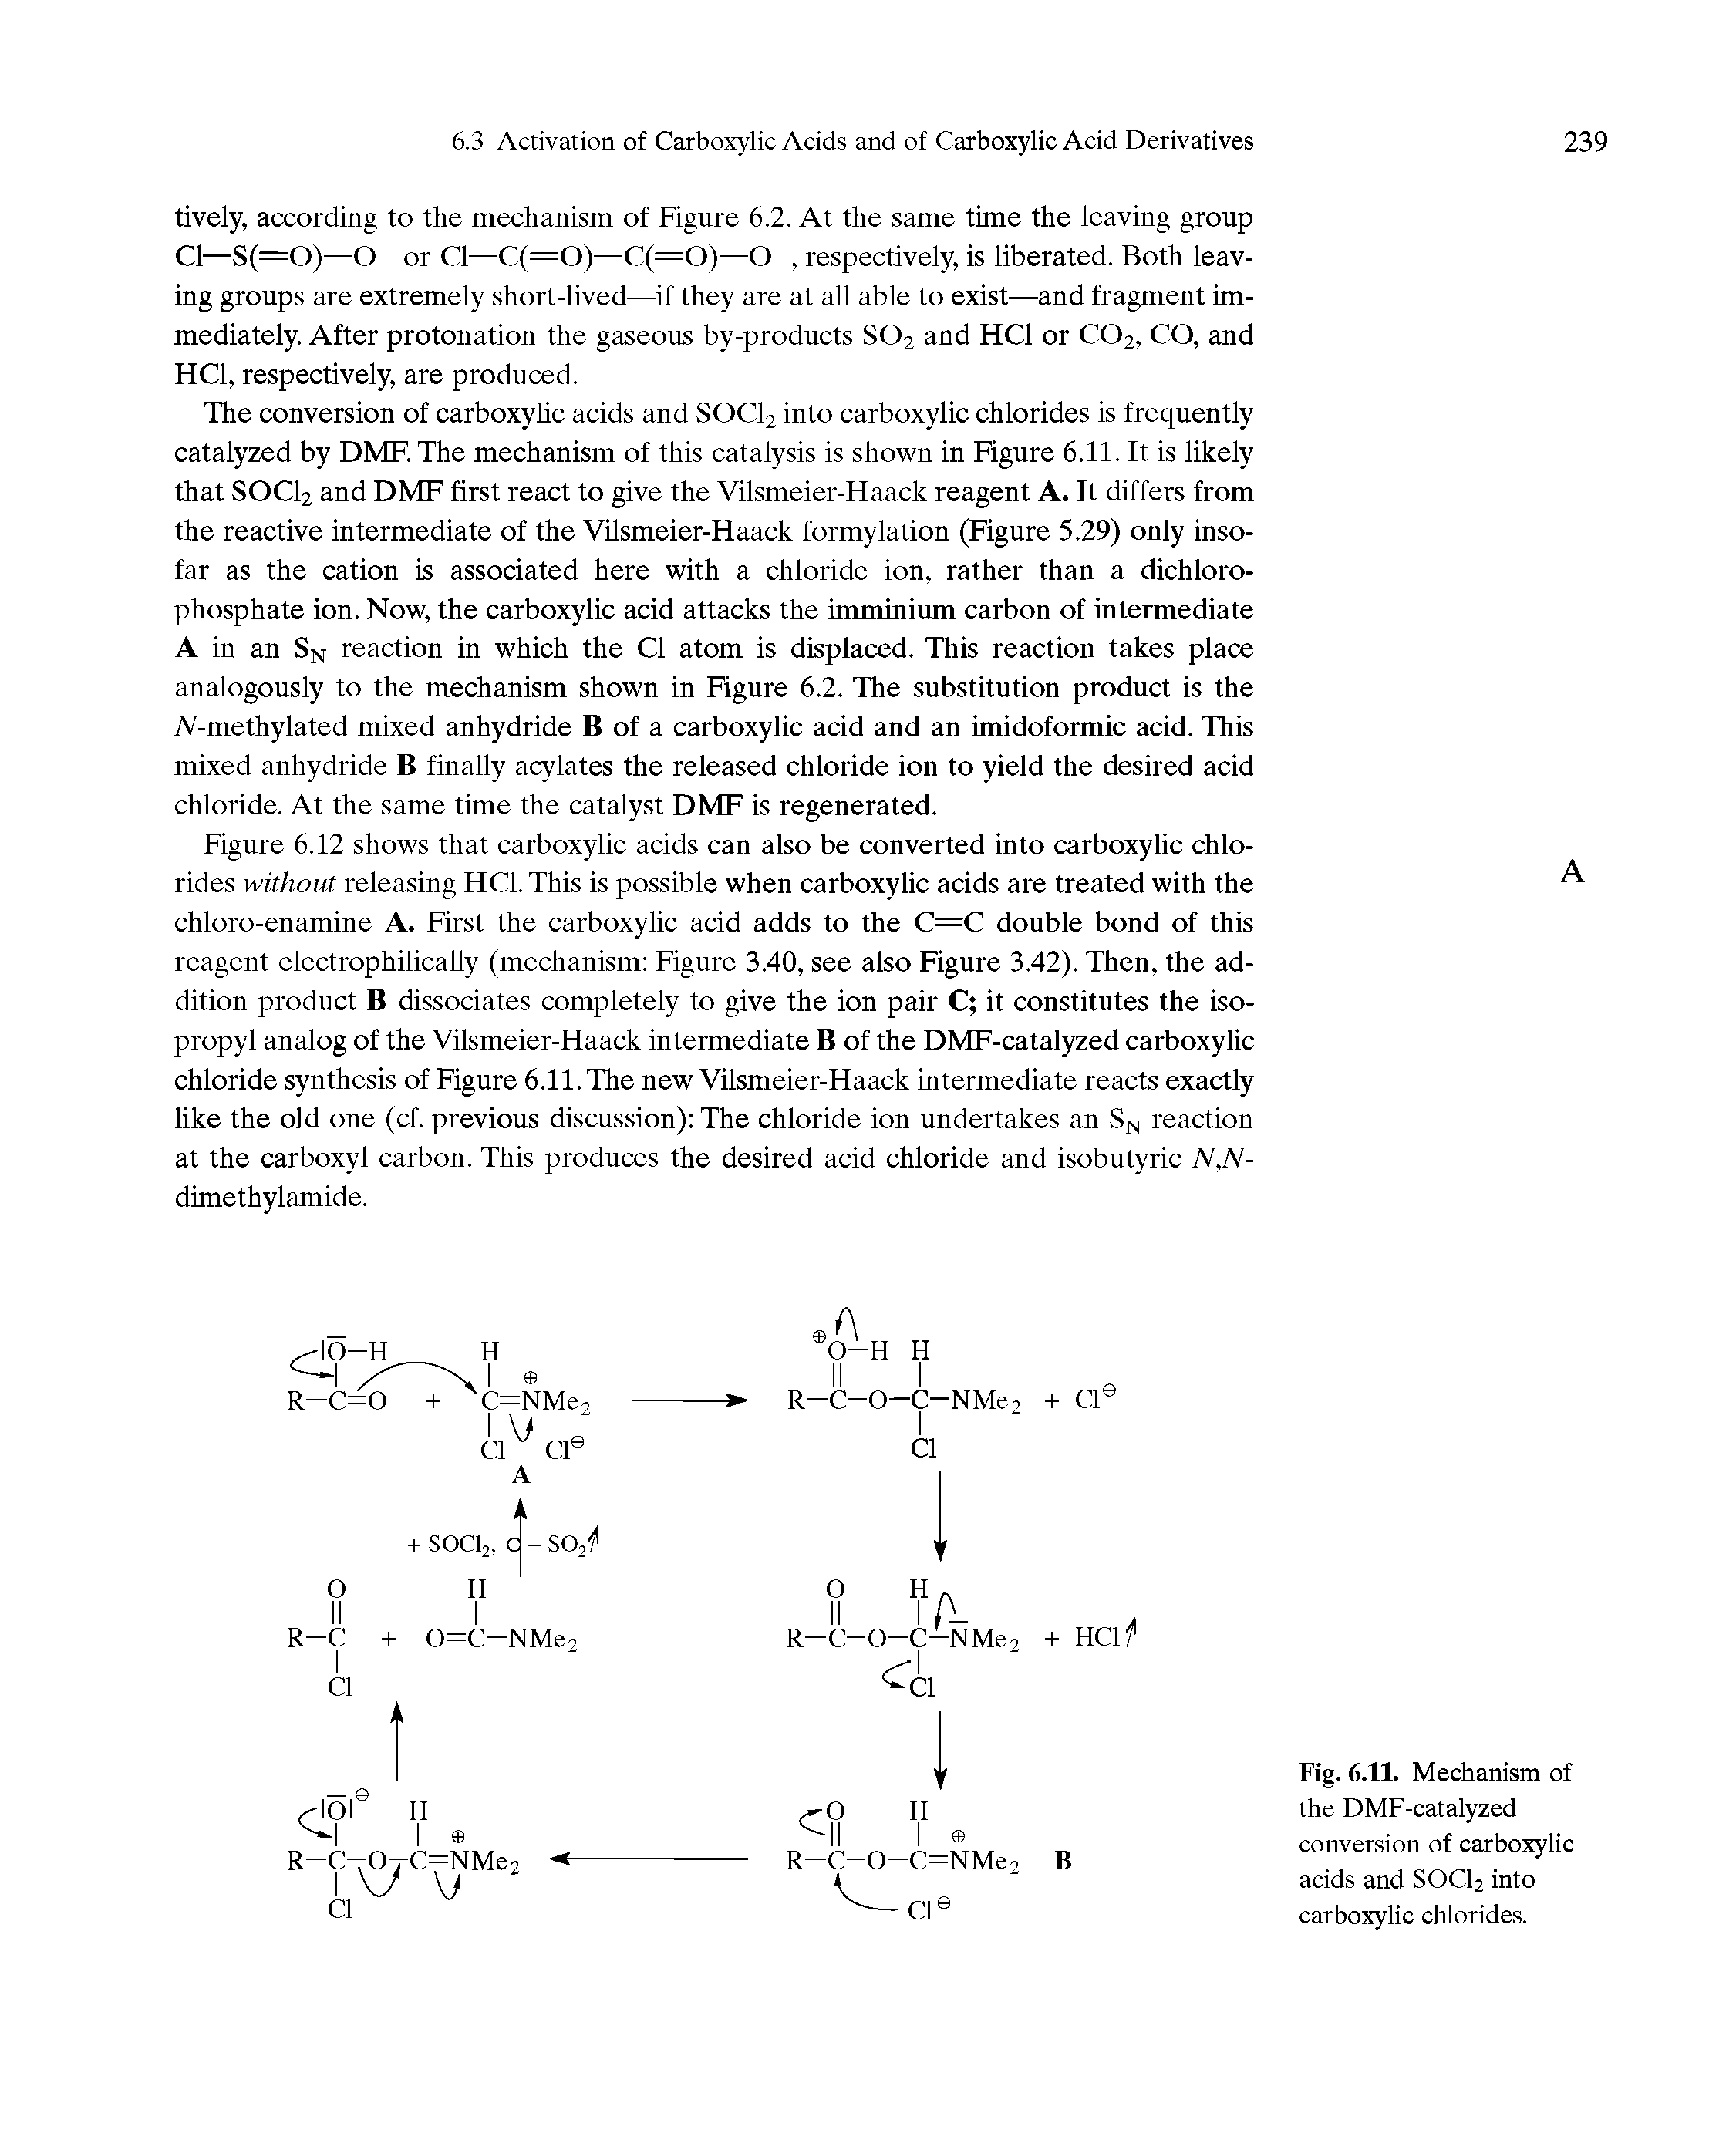 Figure 6.12 shows that carboxylic acids can also be converted into carboxylic chlorides without releasing HC1. This is possible when carboxylic acids are treated with the chloro-enamine A. First the carboxylic acid adds to the C=C double bond of this reagent electrophilically (mechanism Figure 3.40, see also Figure 3.42). Then, the addition product B dissociates completely to give the ion pair C it constitutes the isopropyl analog of the Vilsmeier-Haack intermediate B of the DMF-catalyzed carboxylic chloride synthesis of Figure 6.11. The new Vilsmeier-Haack intermediate reacts exactly like the old one (cf. previous discussion) The chloride ion undertakes an SN reaction at the carboxyl carbon. This produces the desired acid chloride and isobutyric N,N-dimethylamide.